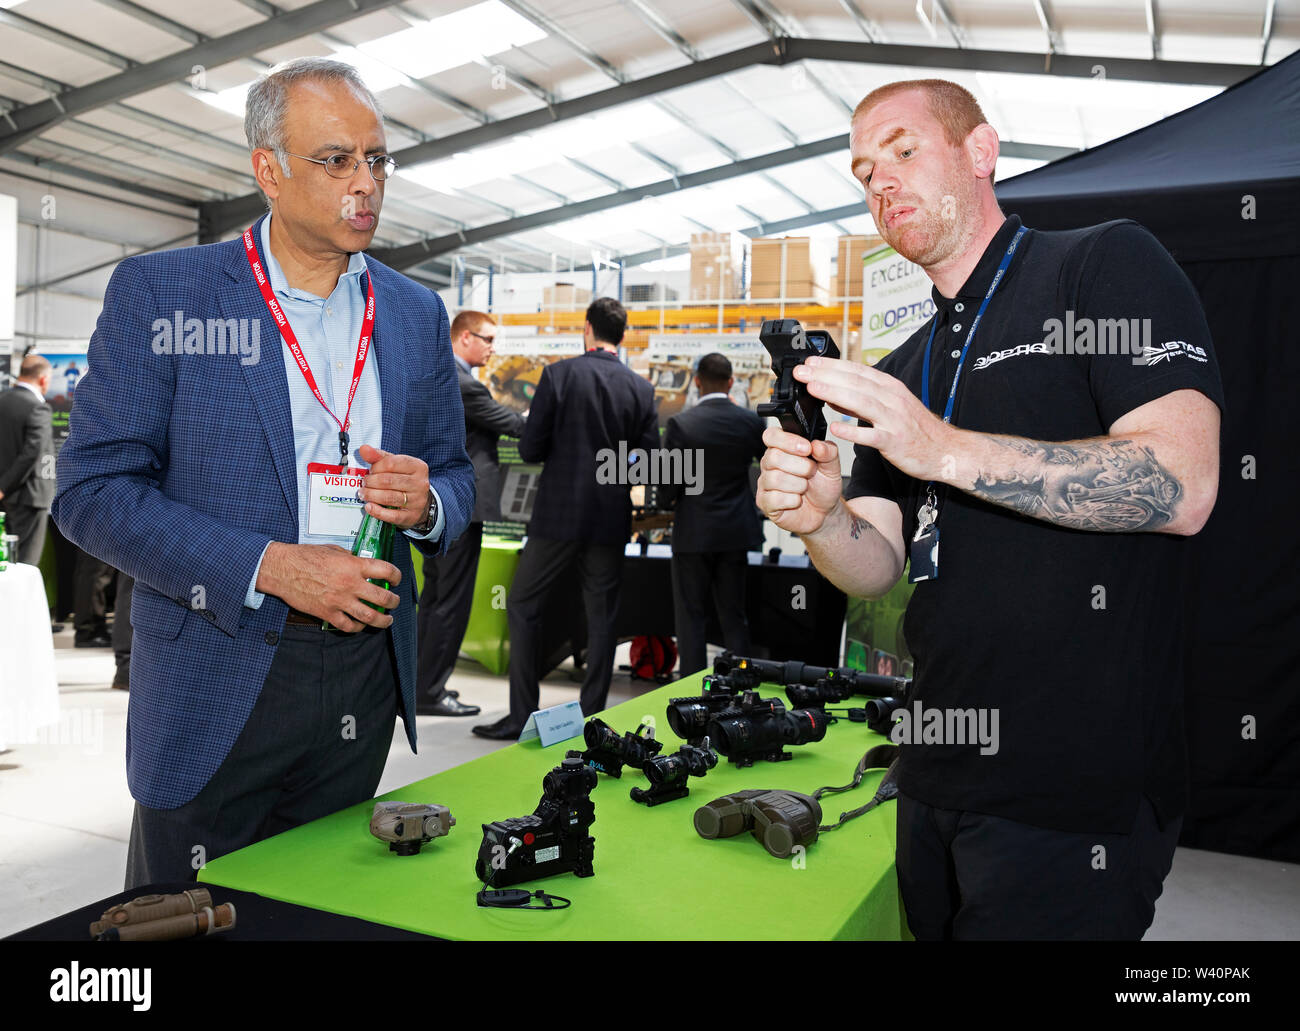 Photograph by © Jamie Callister. Excelitas Board along with CEO David Nislik come to visit Qioptiq, St. Asaph, Denbighshire, North Wales, 14th of May, Stock Photo